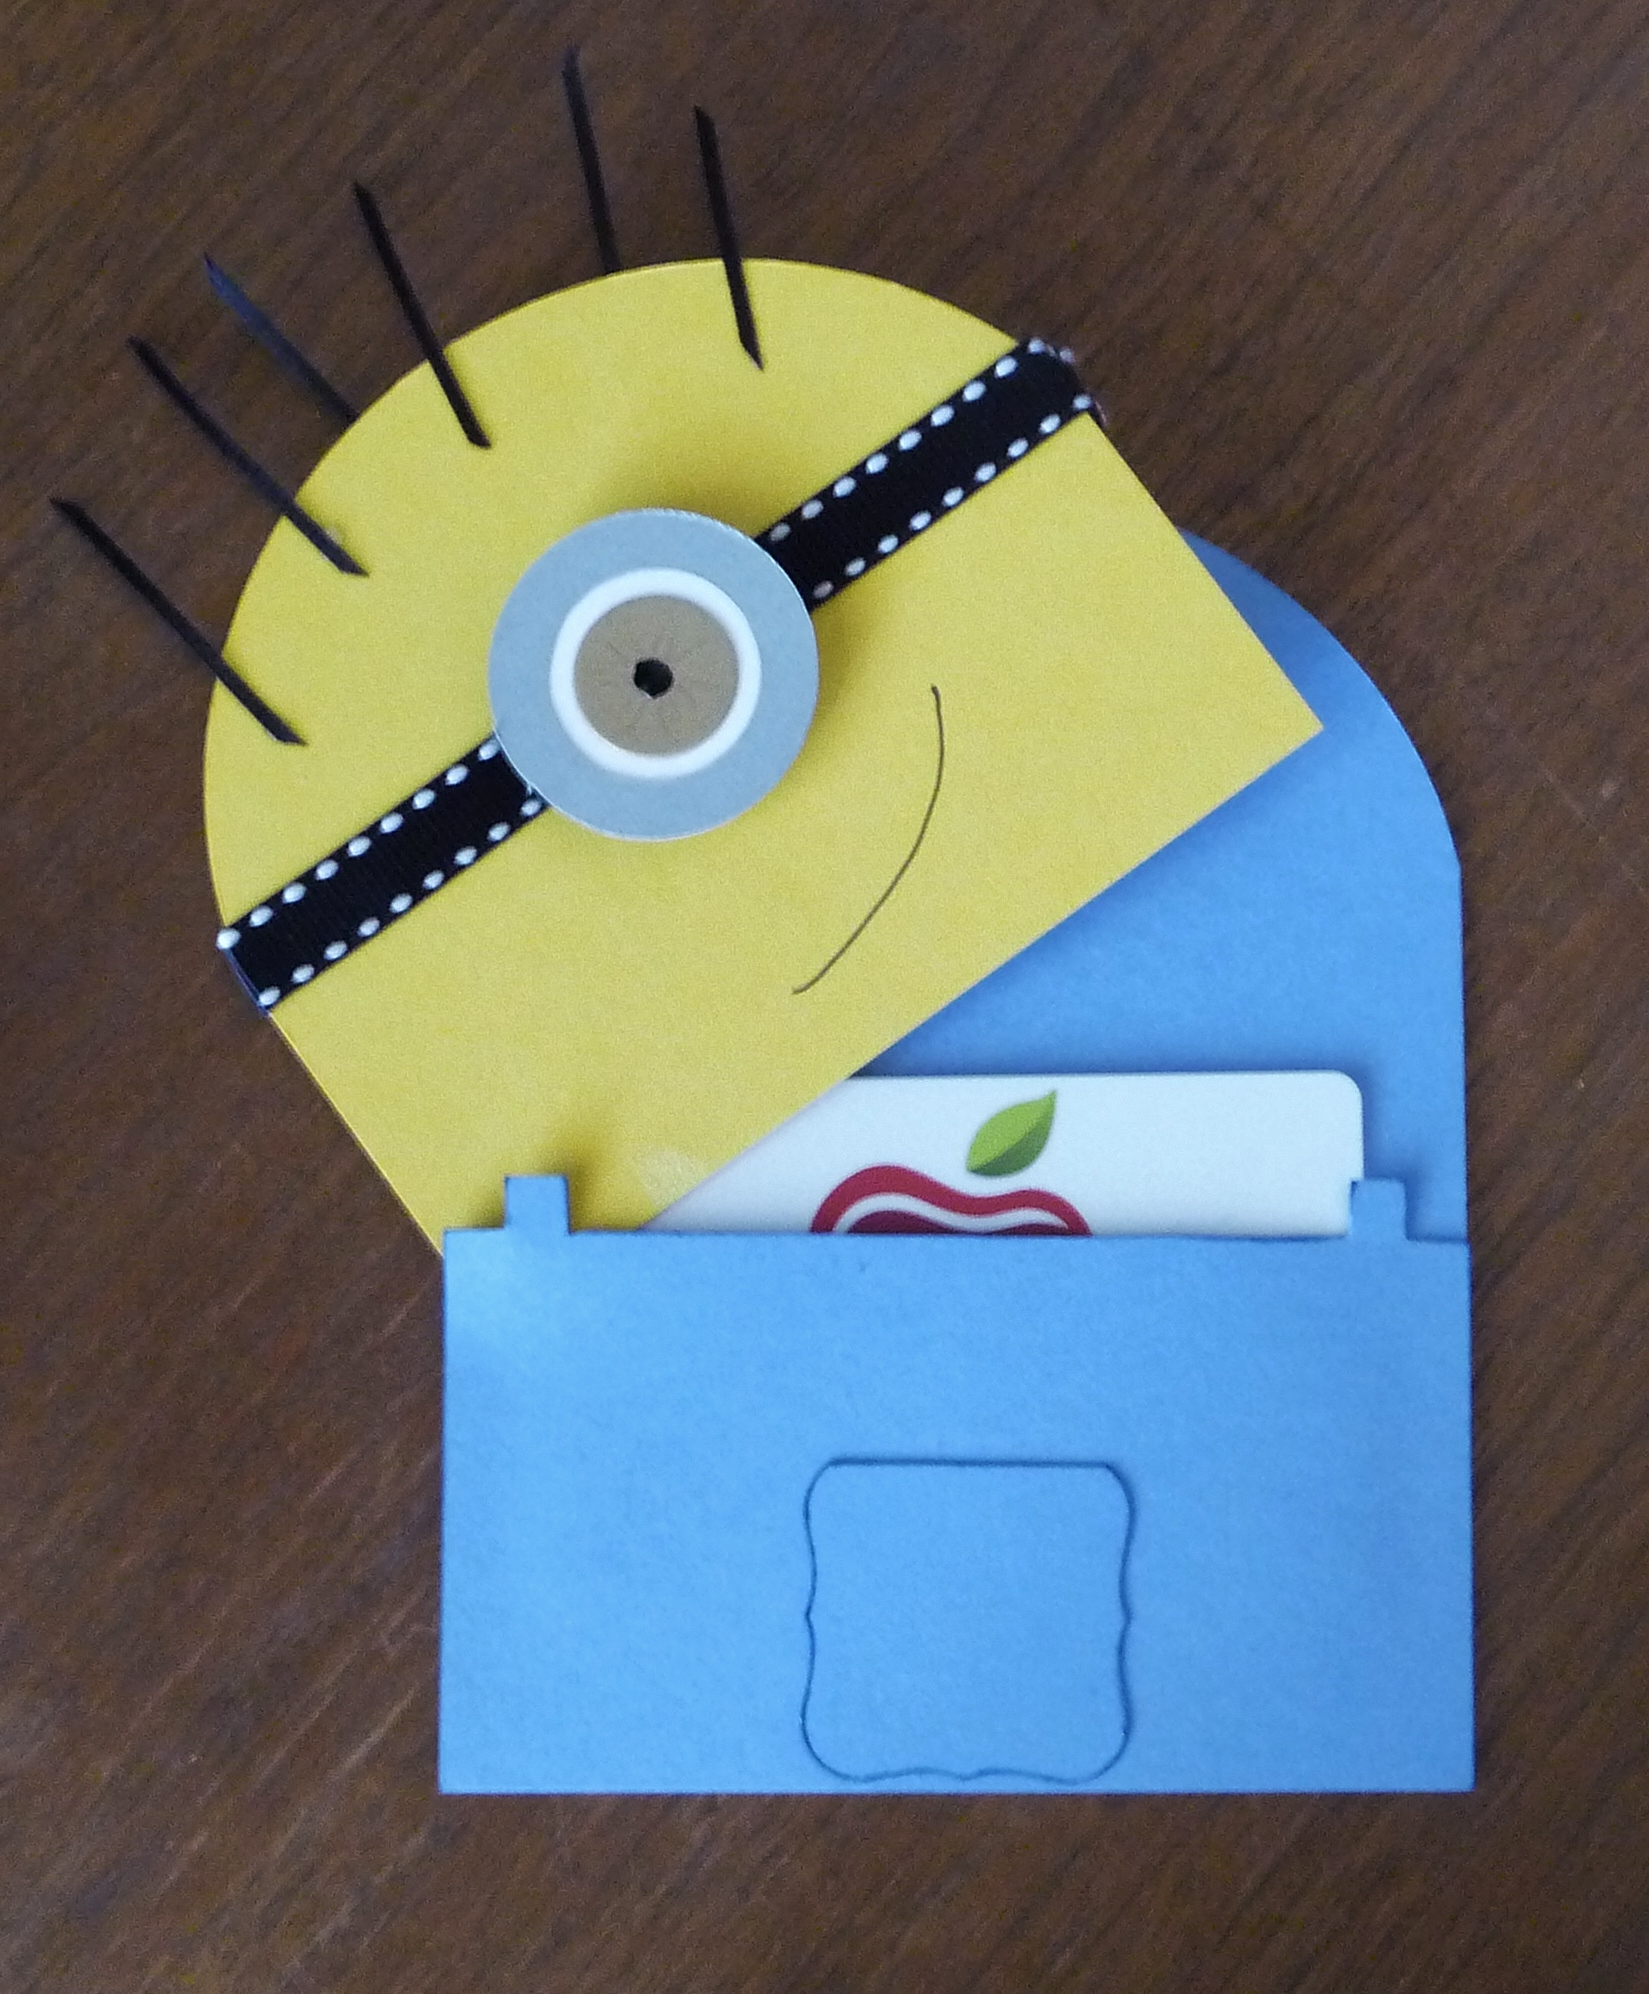 Minion Gift Card Holder – Cards and Candles in Progress